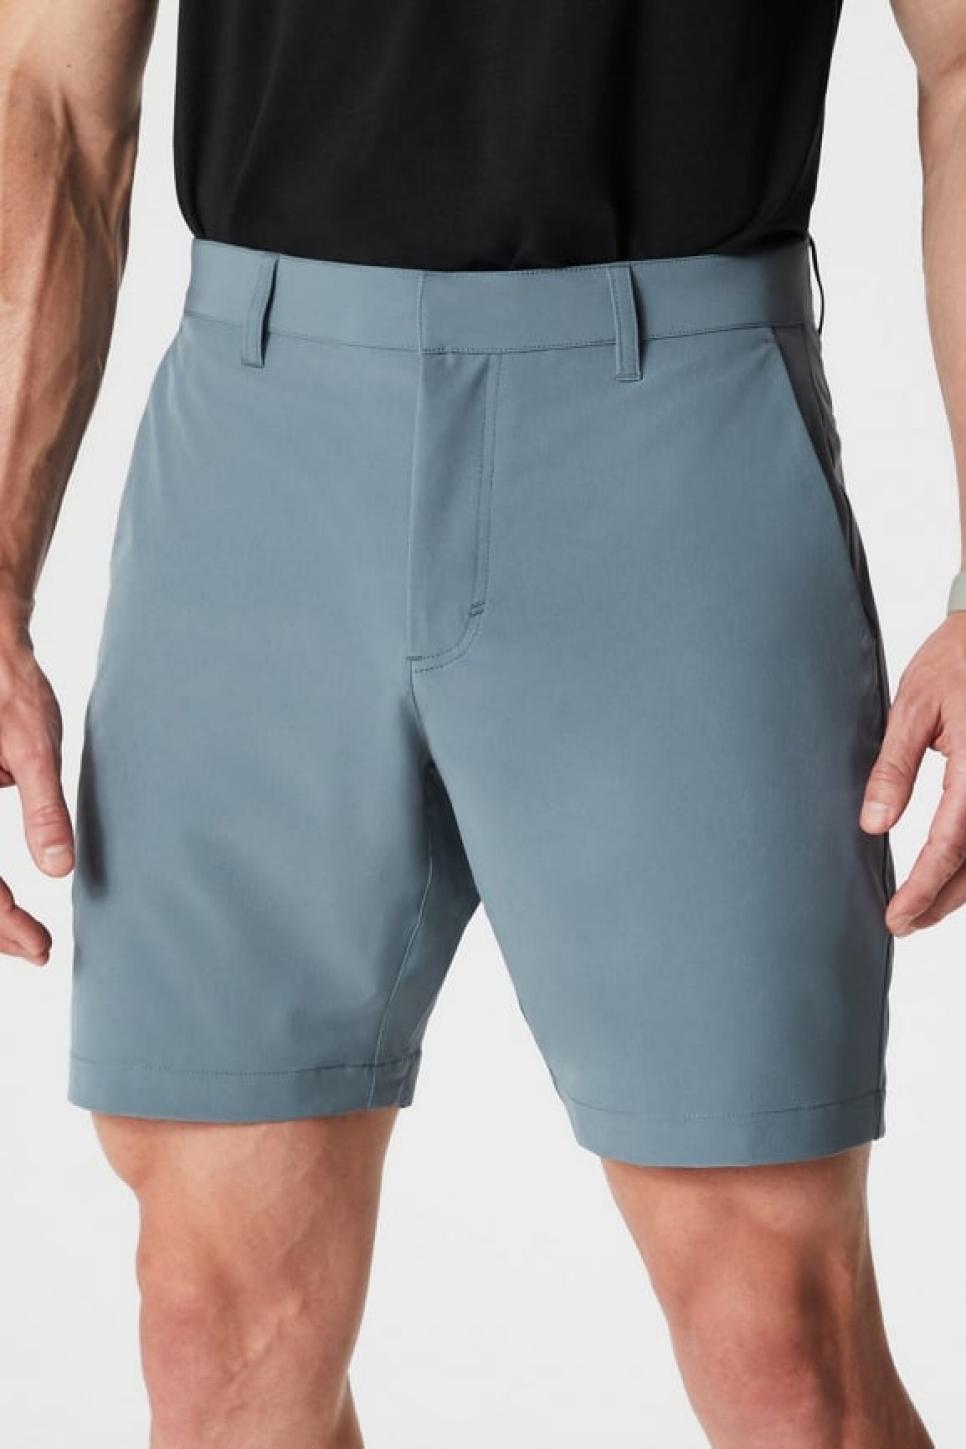 rx-fableticsfabletics-mens-the-only-short.jpeg